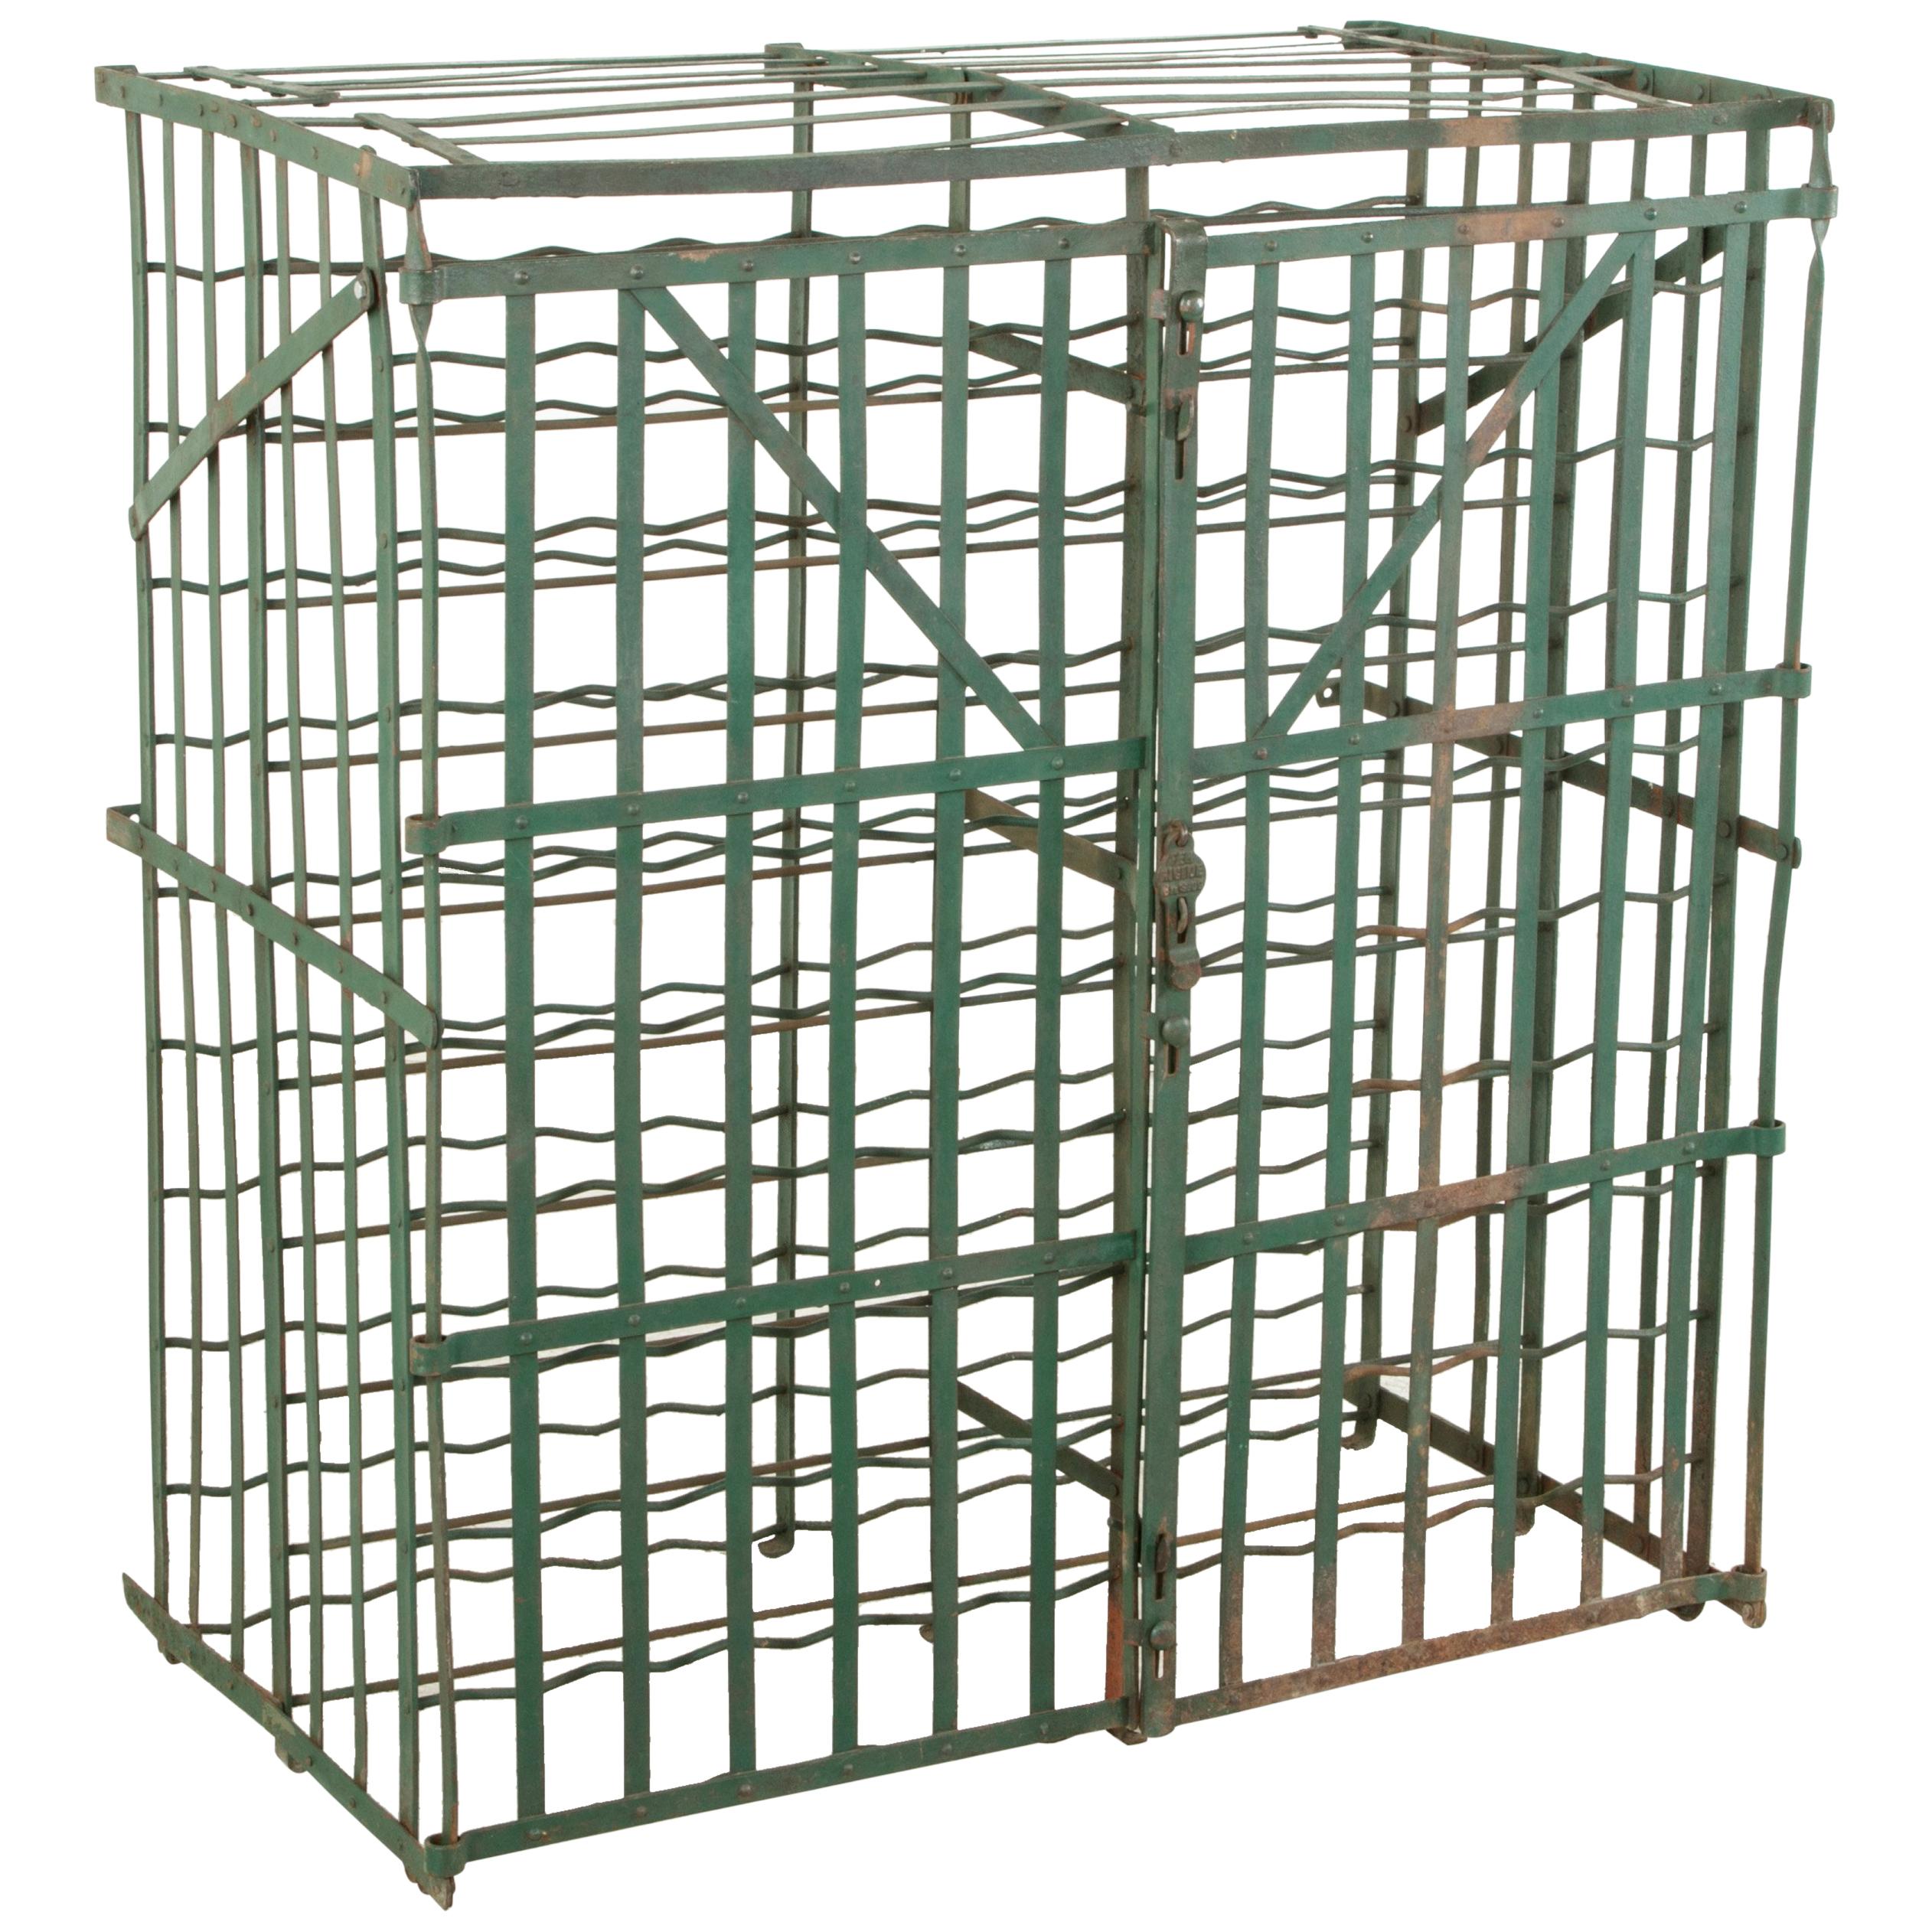 Early 20th Century French Riveted Iron Wine Cage or Wine Cellar for 200 Bottles